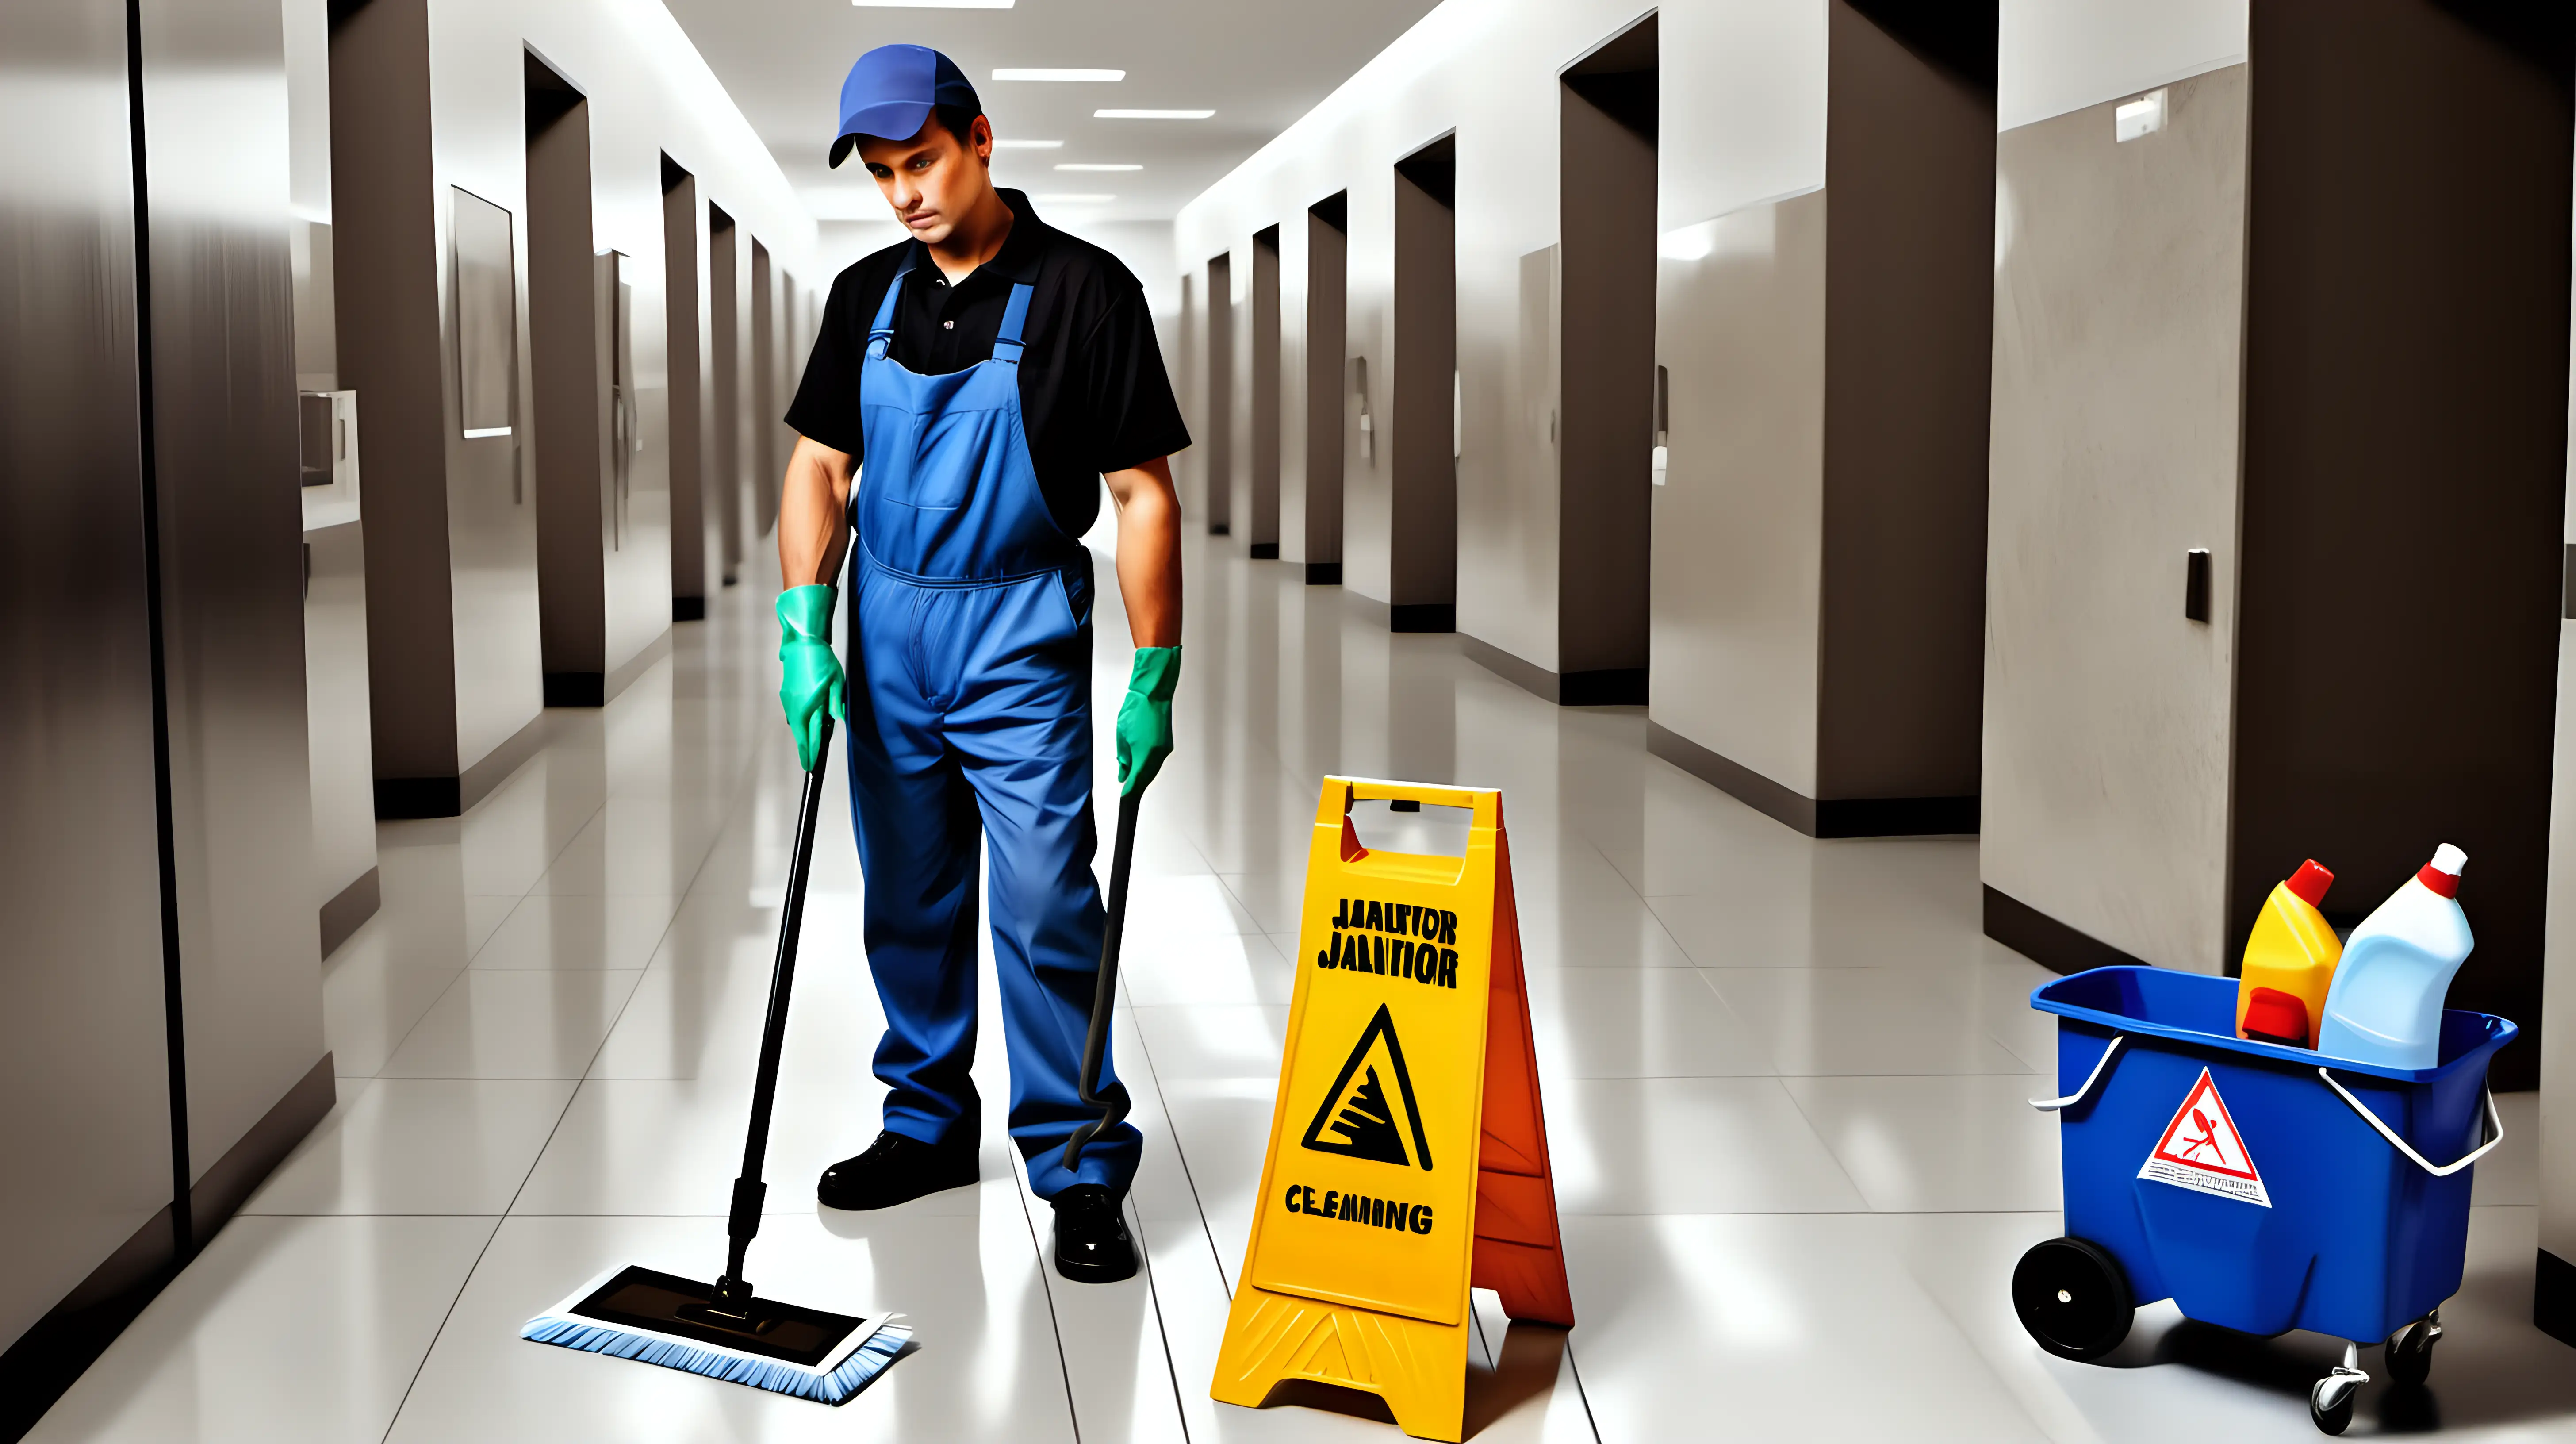 Diligent Janitor Cleaning Public Space with Weariness